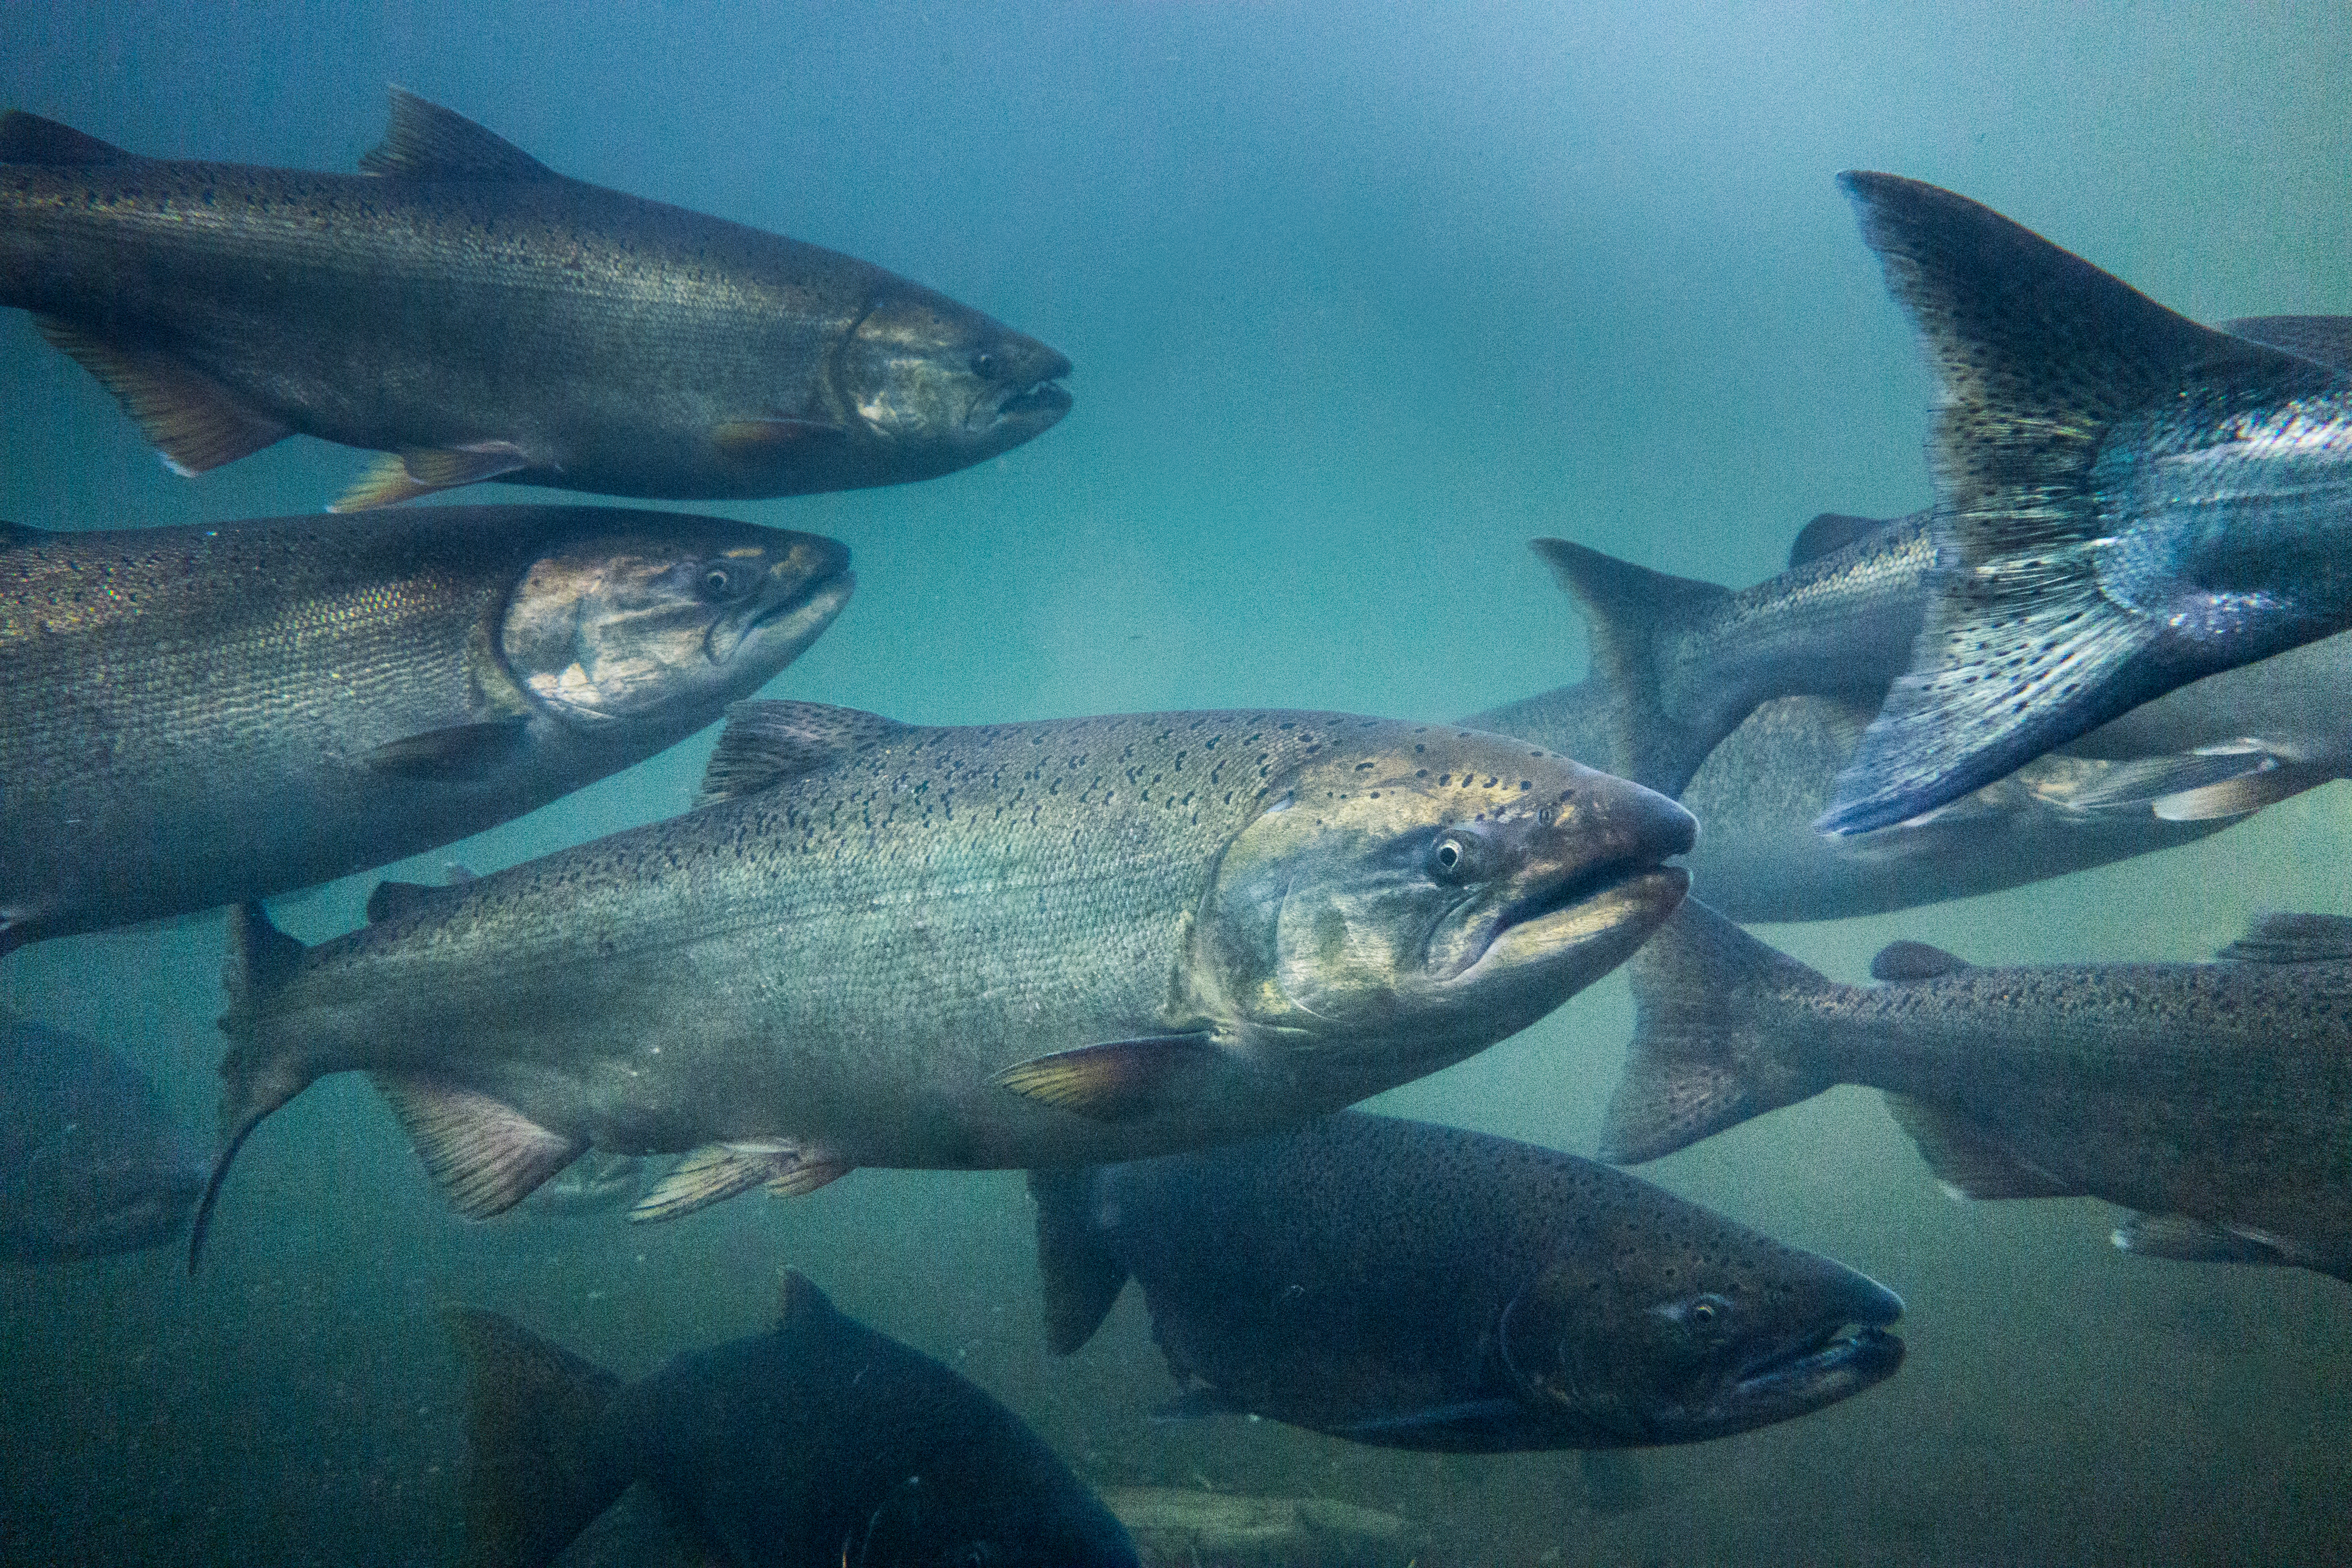 How to Fish Flashers for West Coast Salmon